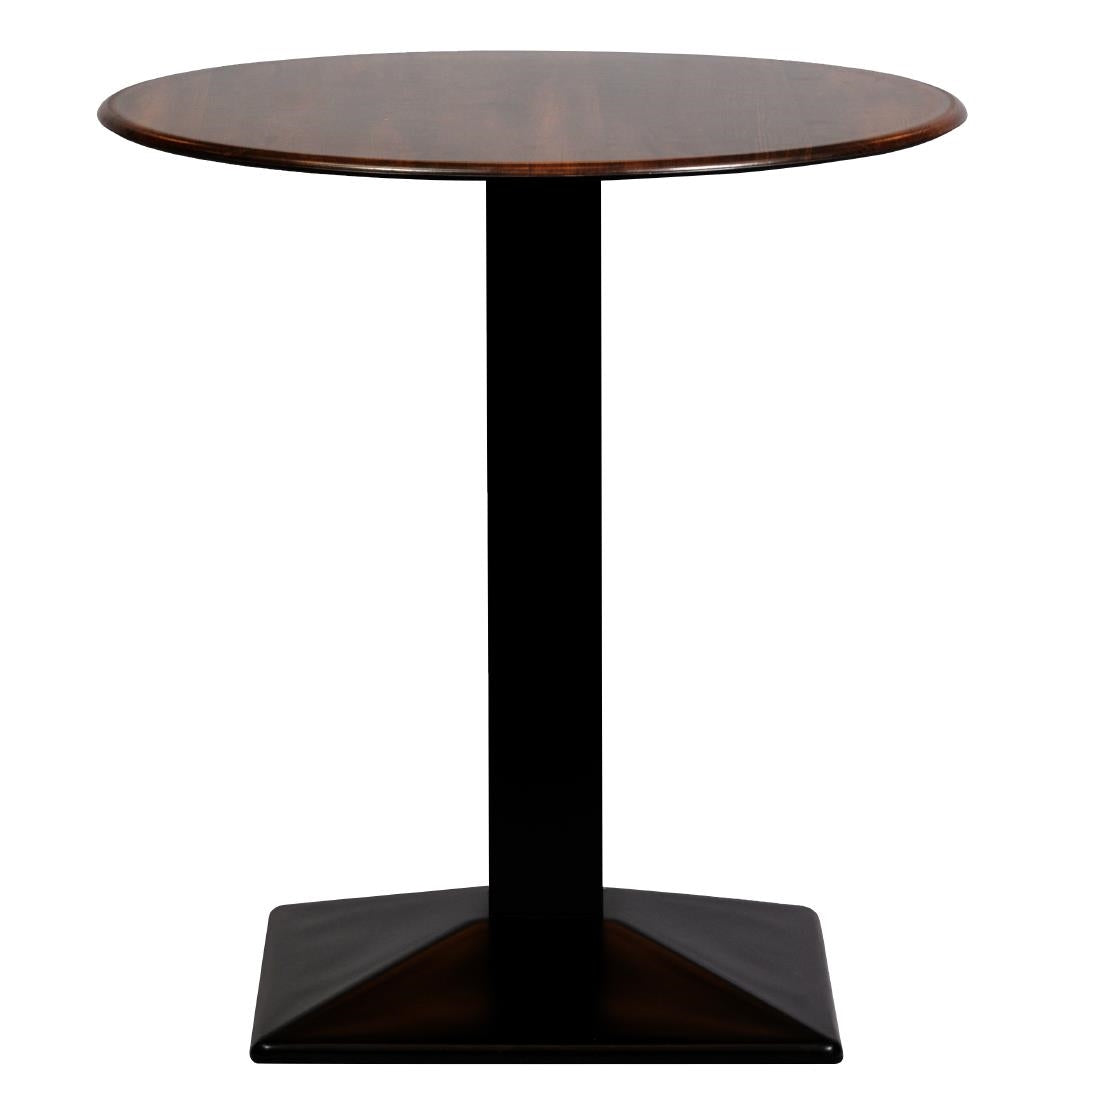 CZ821 Turin Metal Base Round Dining Table with Laminate Top Walnut 600mm JD Catering Equipment Solutions Ltd